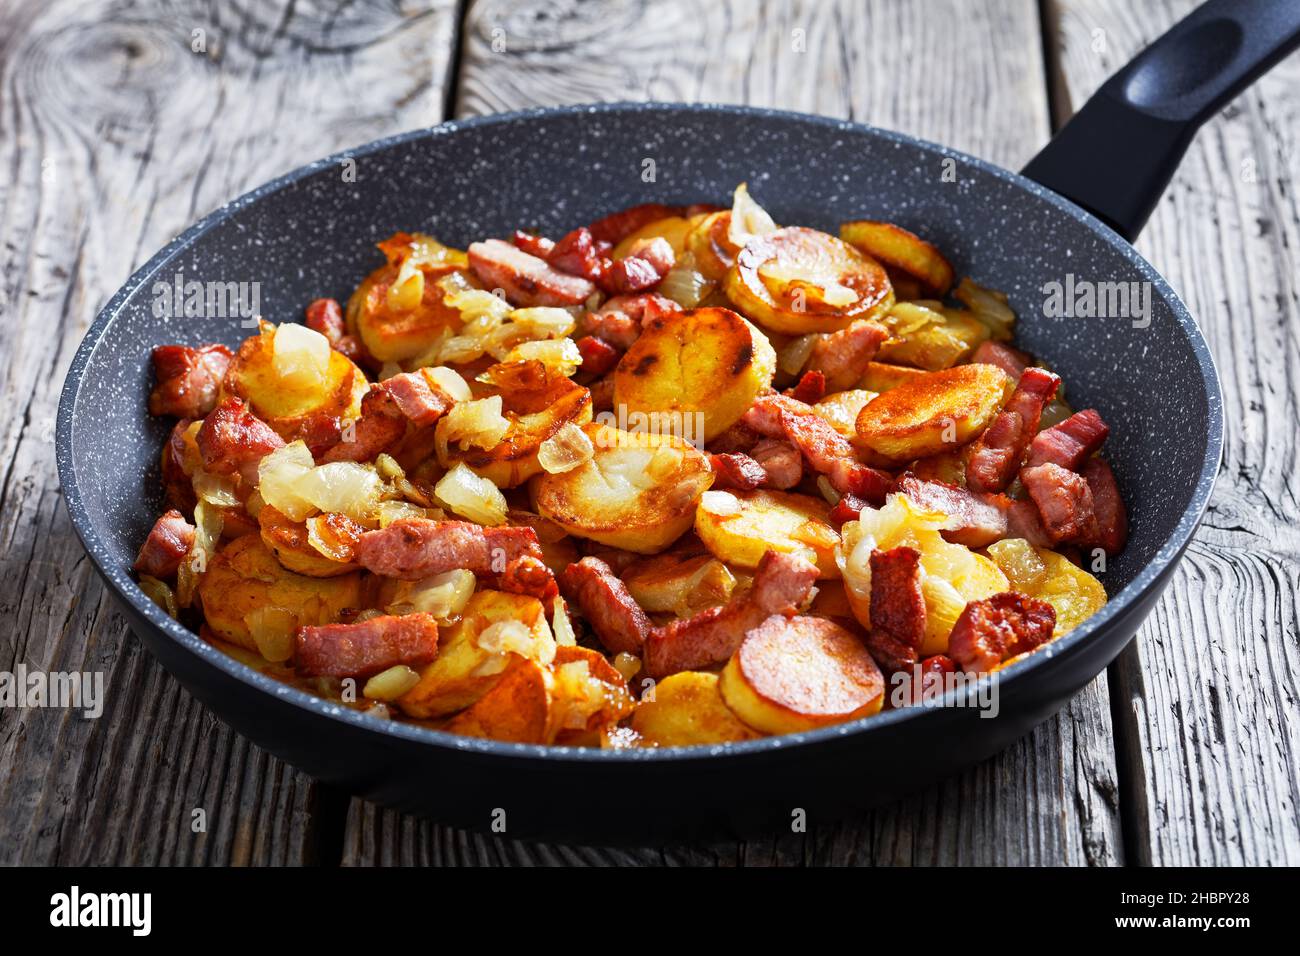 Bratkartoffeln, German fried Potatoes with Bacon and onion in a skillet on a wooden rustic table, close-up Stock Photo